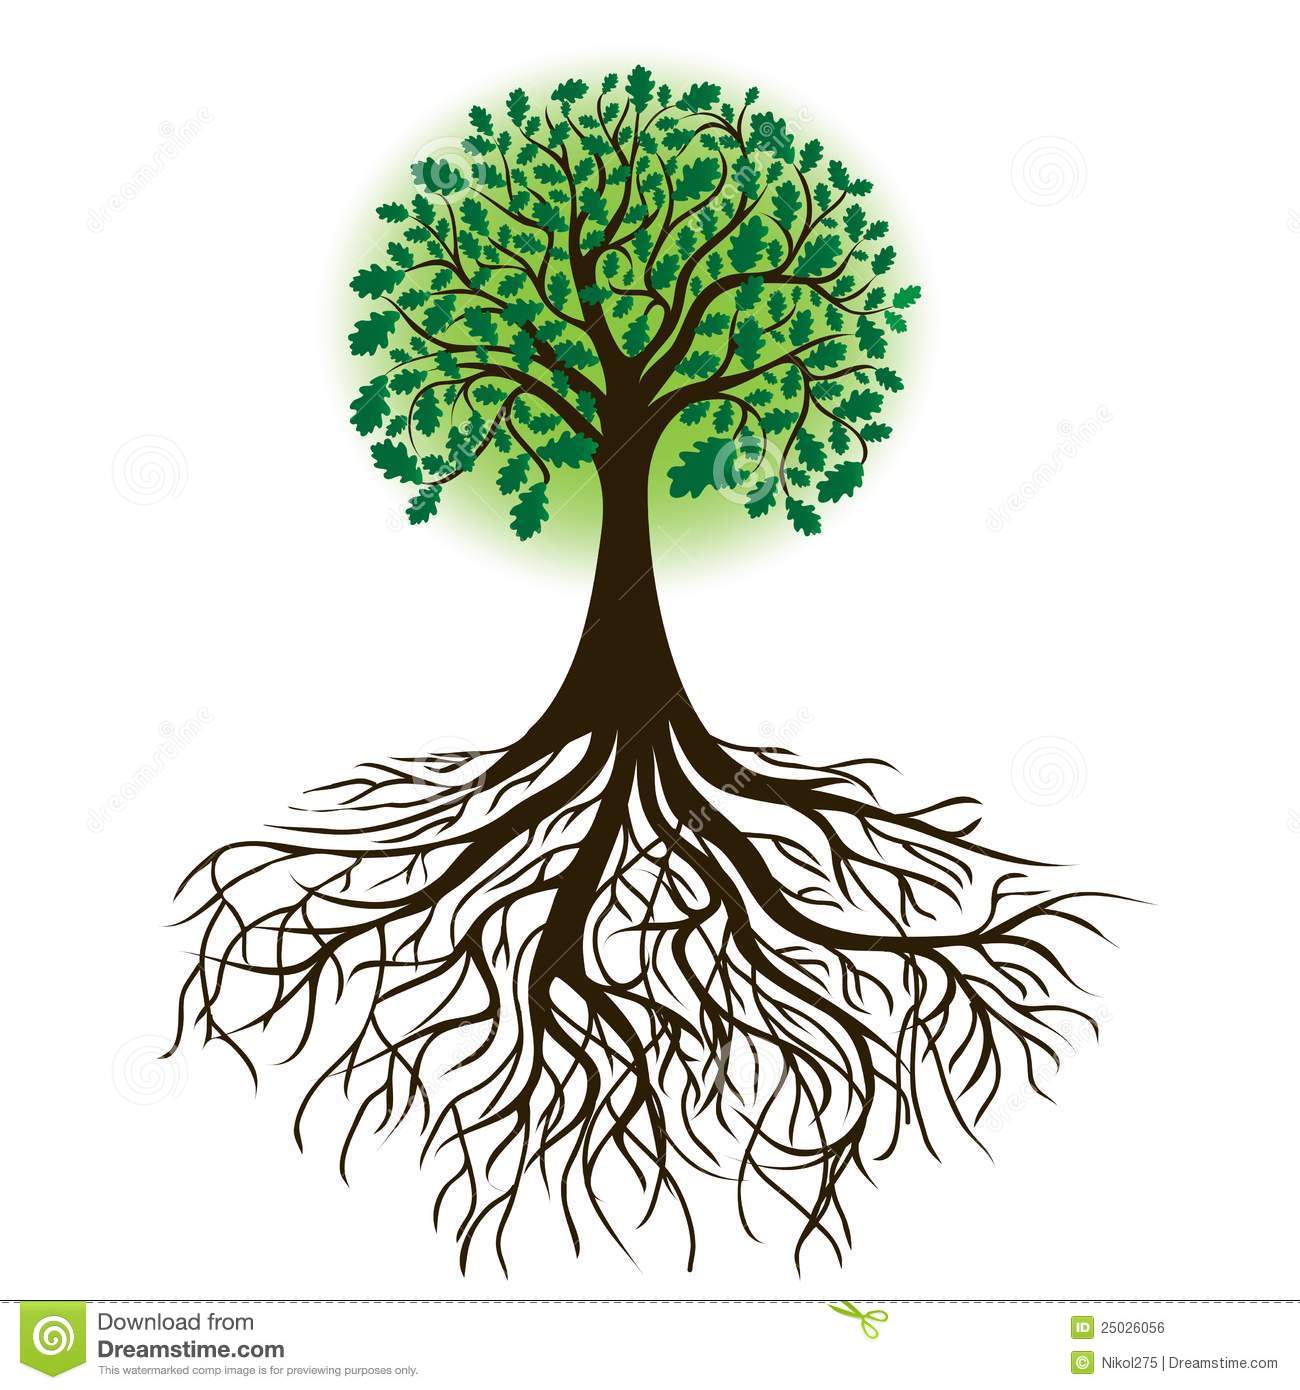 Oak Tree With Roots And Dense Foliage Vector Royalty Free Stock Image